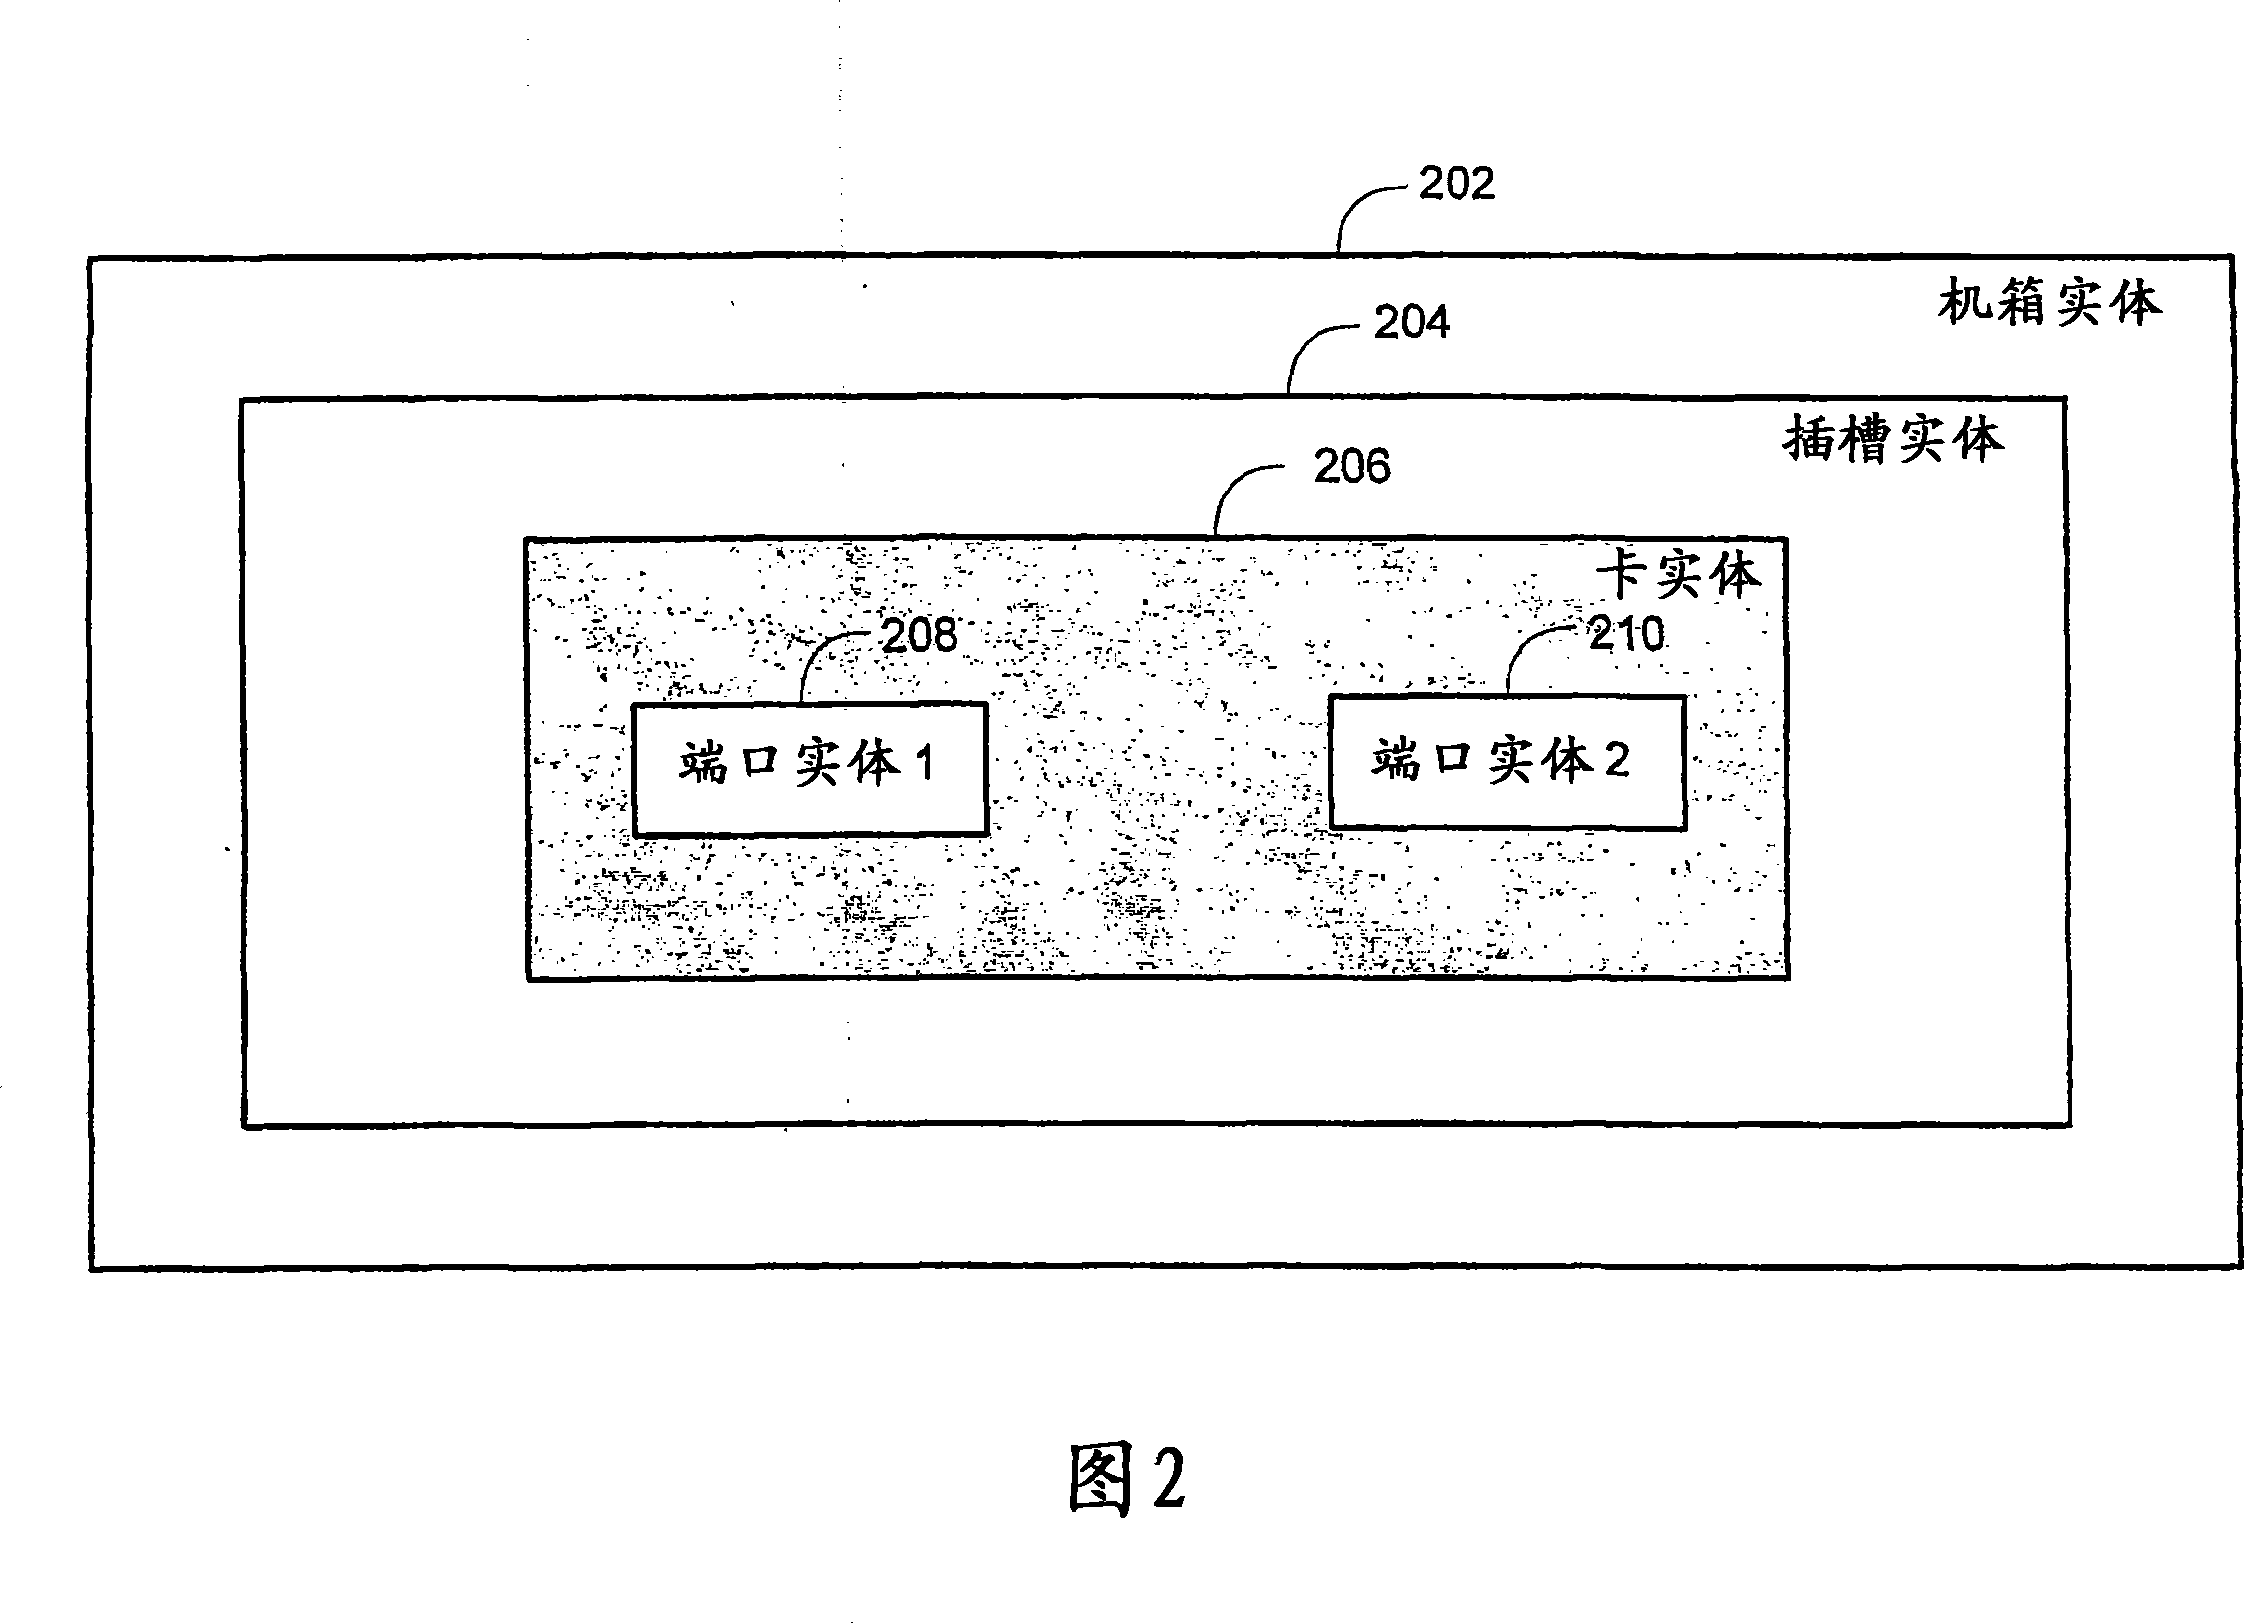 System and method for generating unique and persistent identifiers